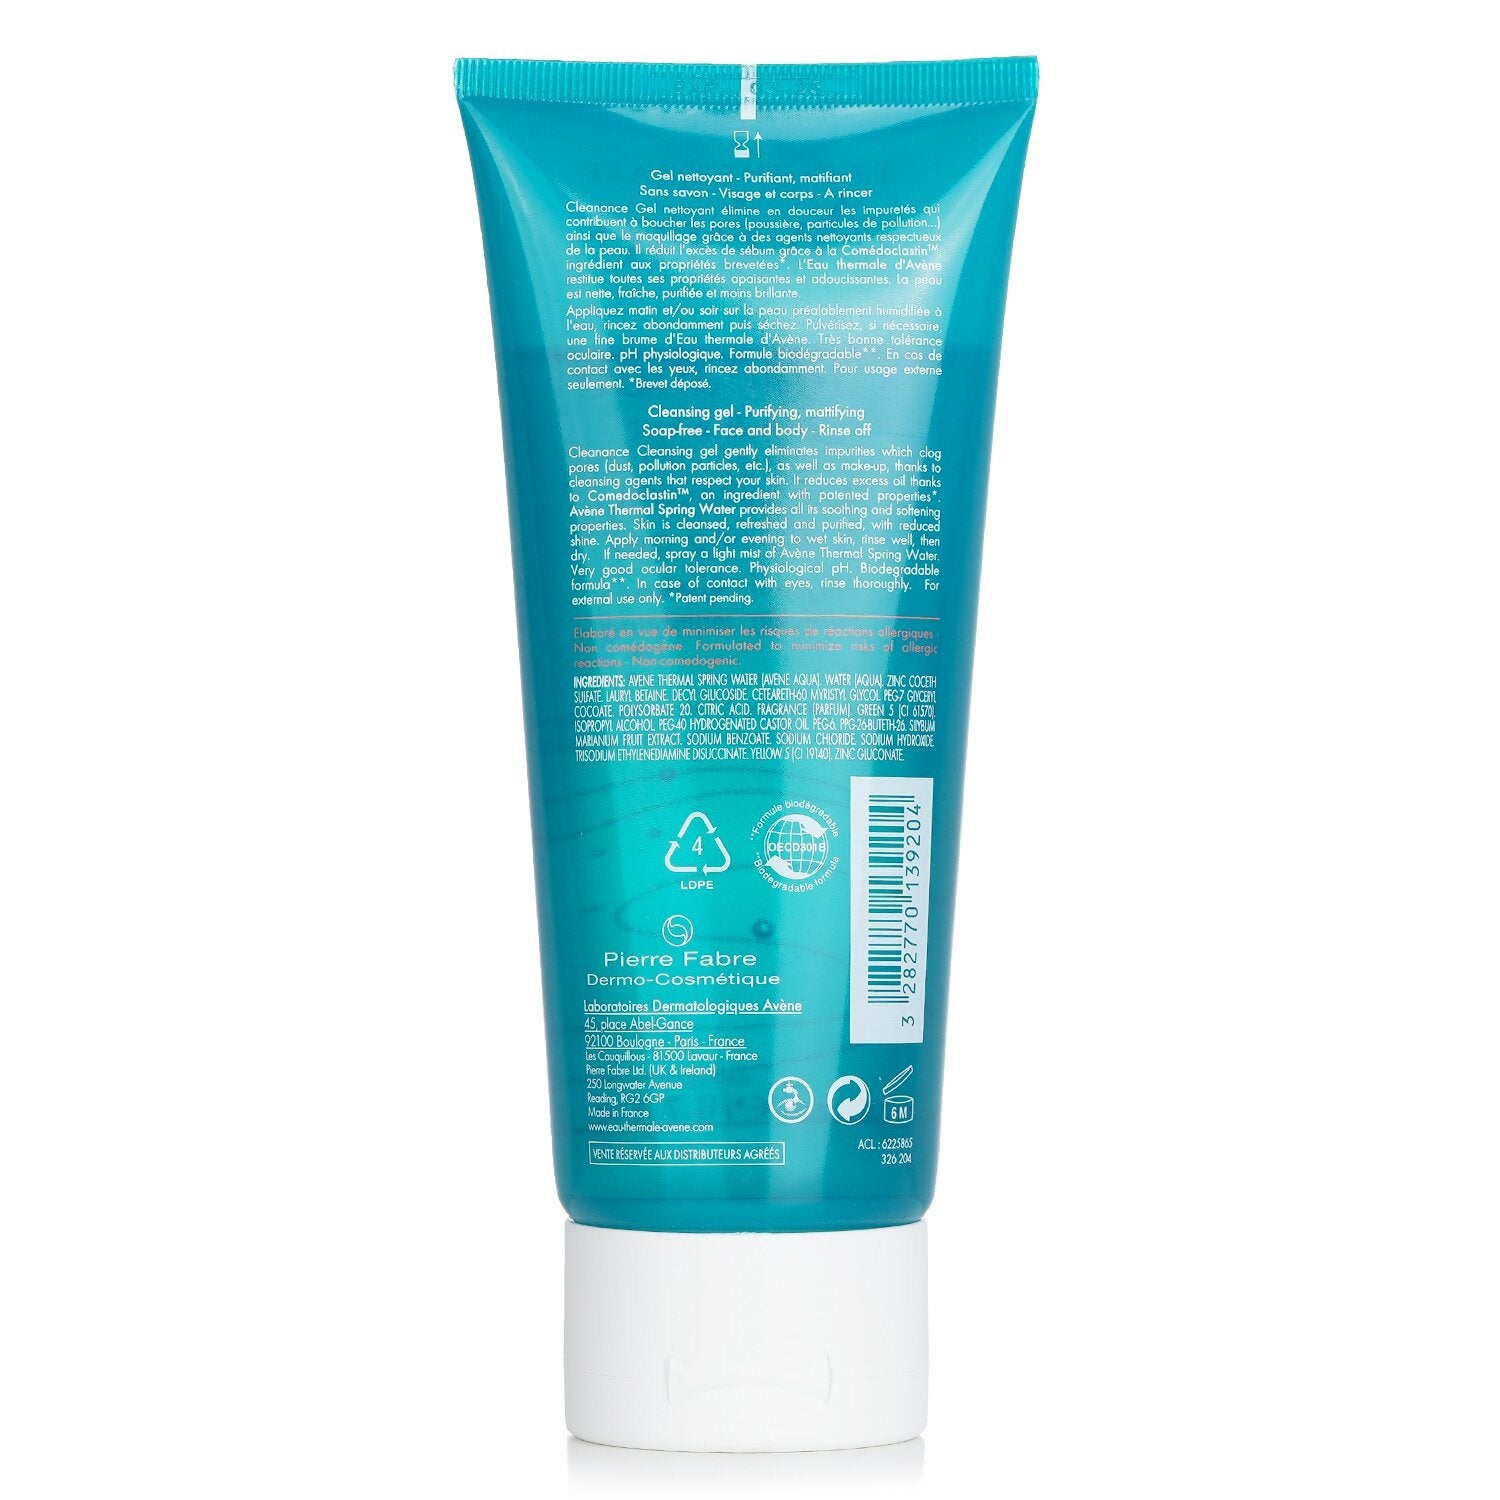 Tube of AVENE - Cleanance Cleansing Gel for oily, blemish-prone skin on a white background.